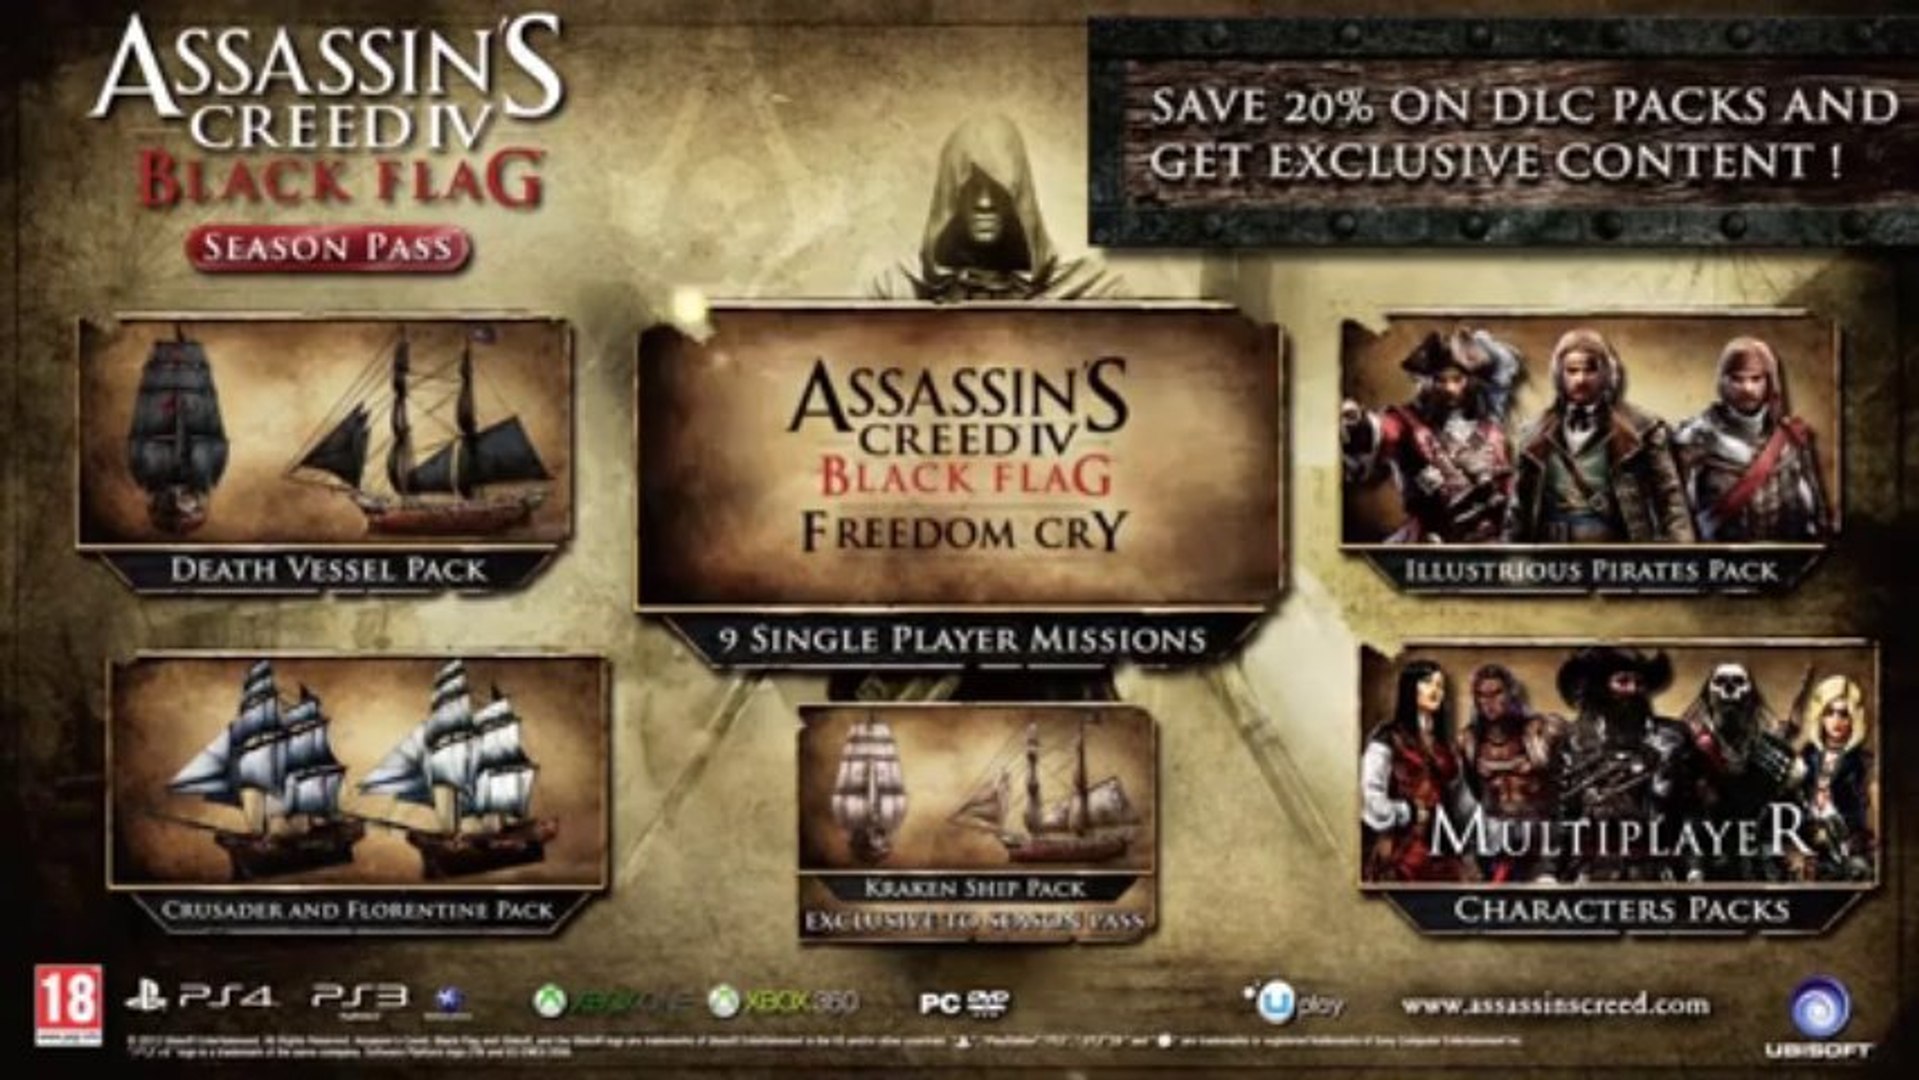 Assassin's Creed 4 - Freedom Cry DLC Trailer - Vidéo Dailymotion